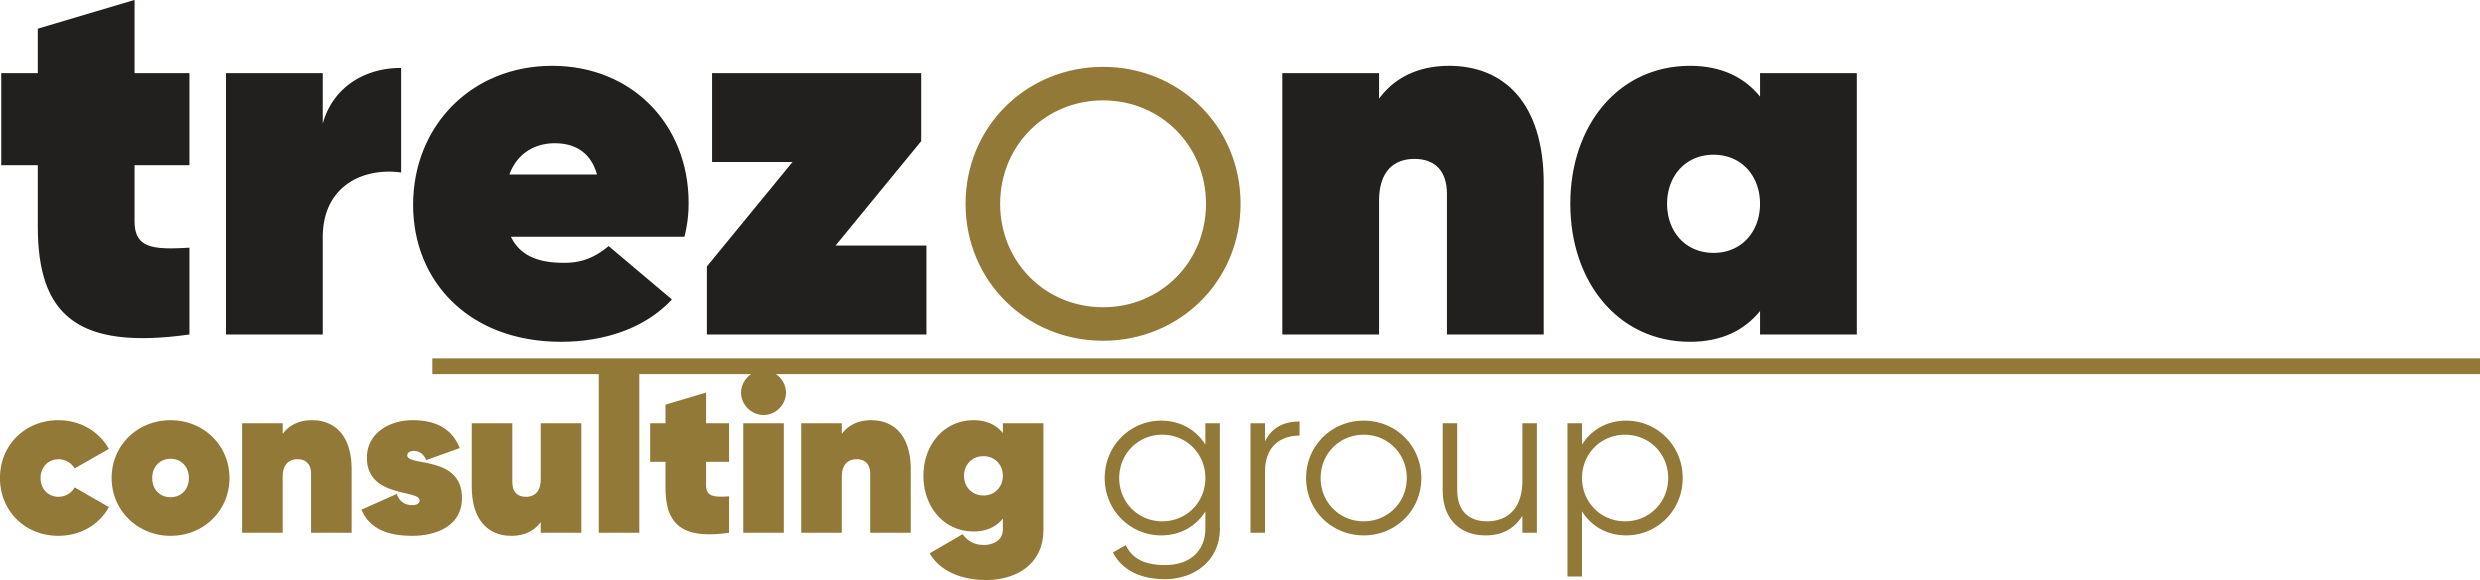 Trezona Consulting Group